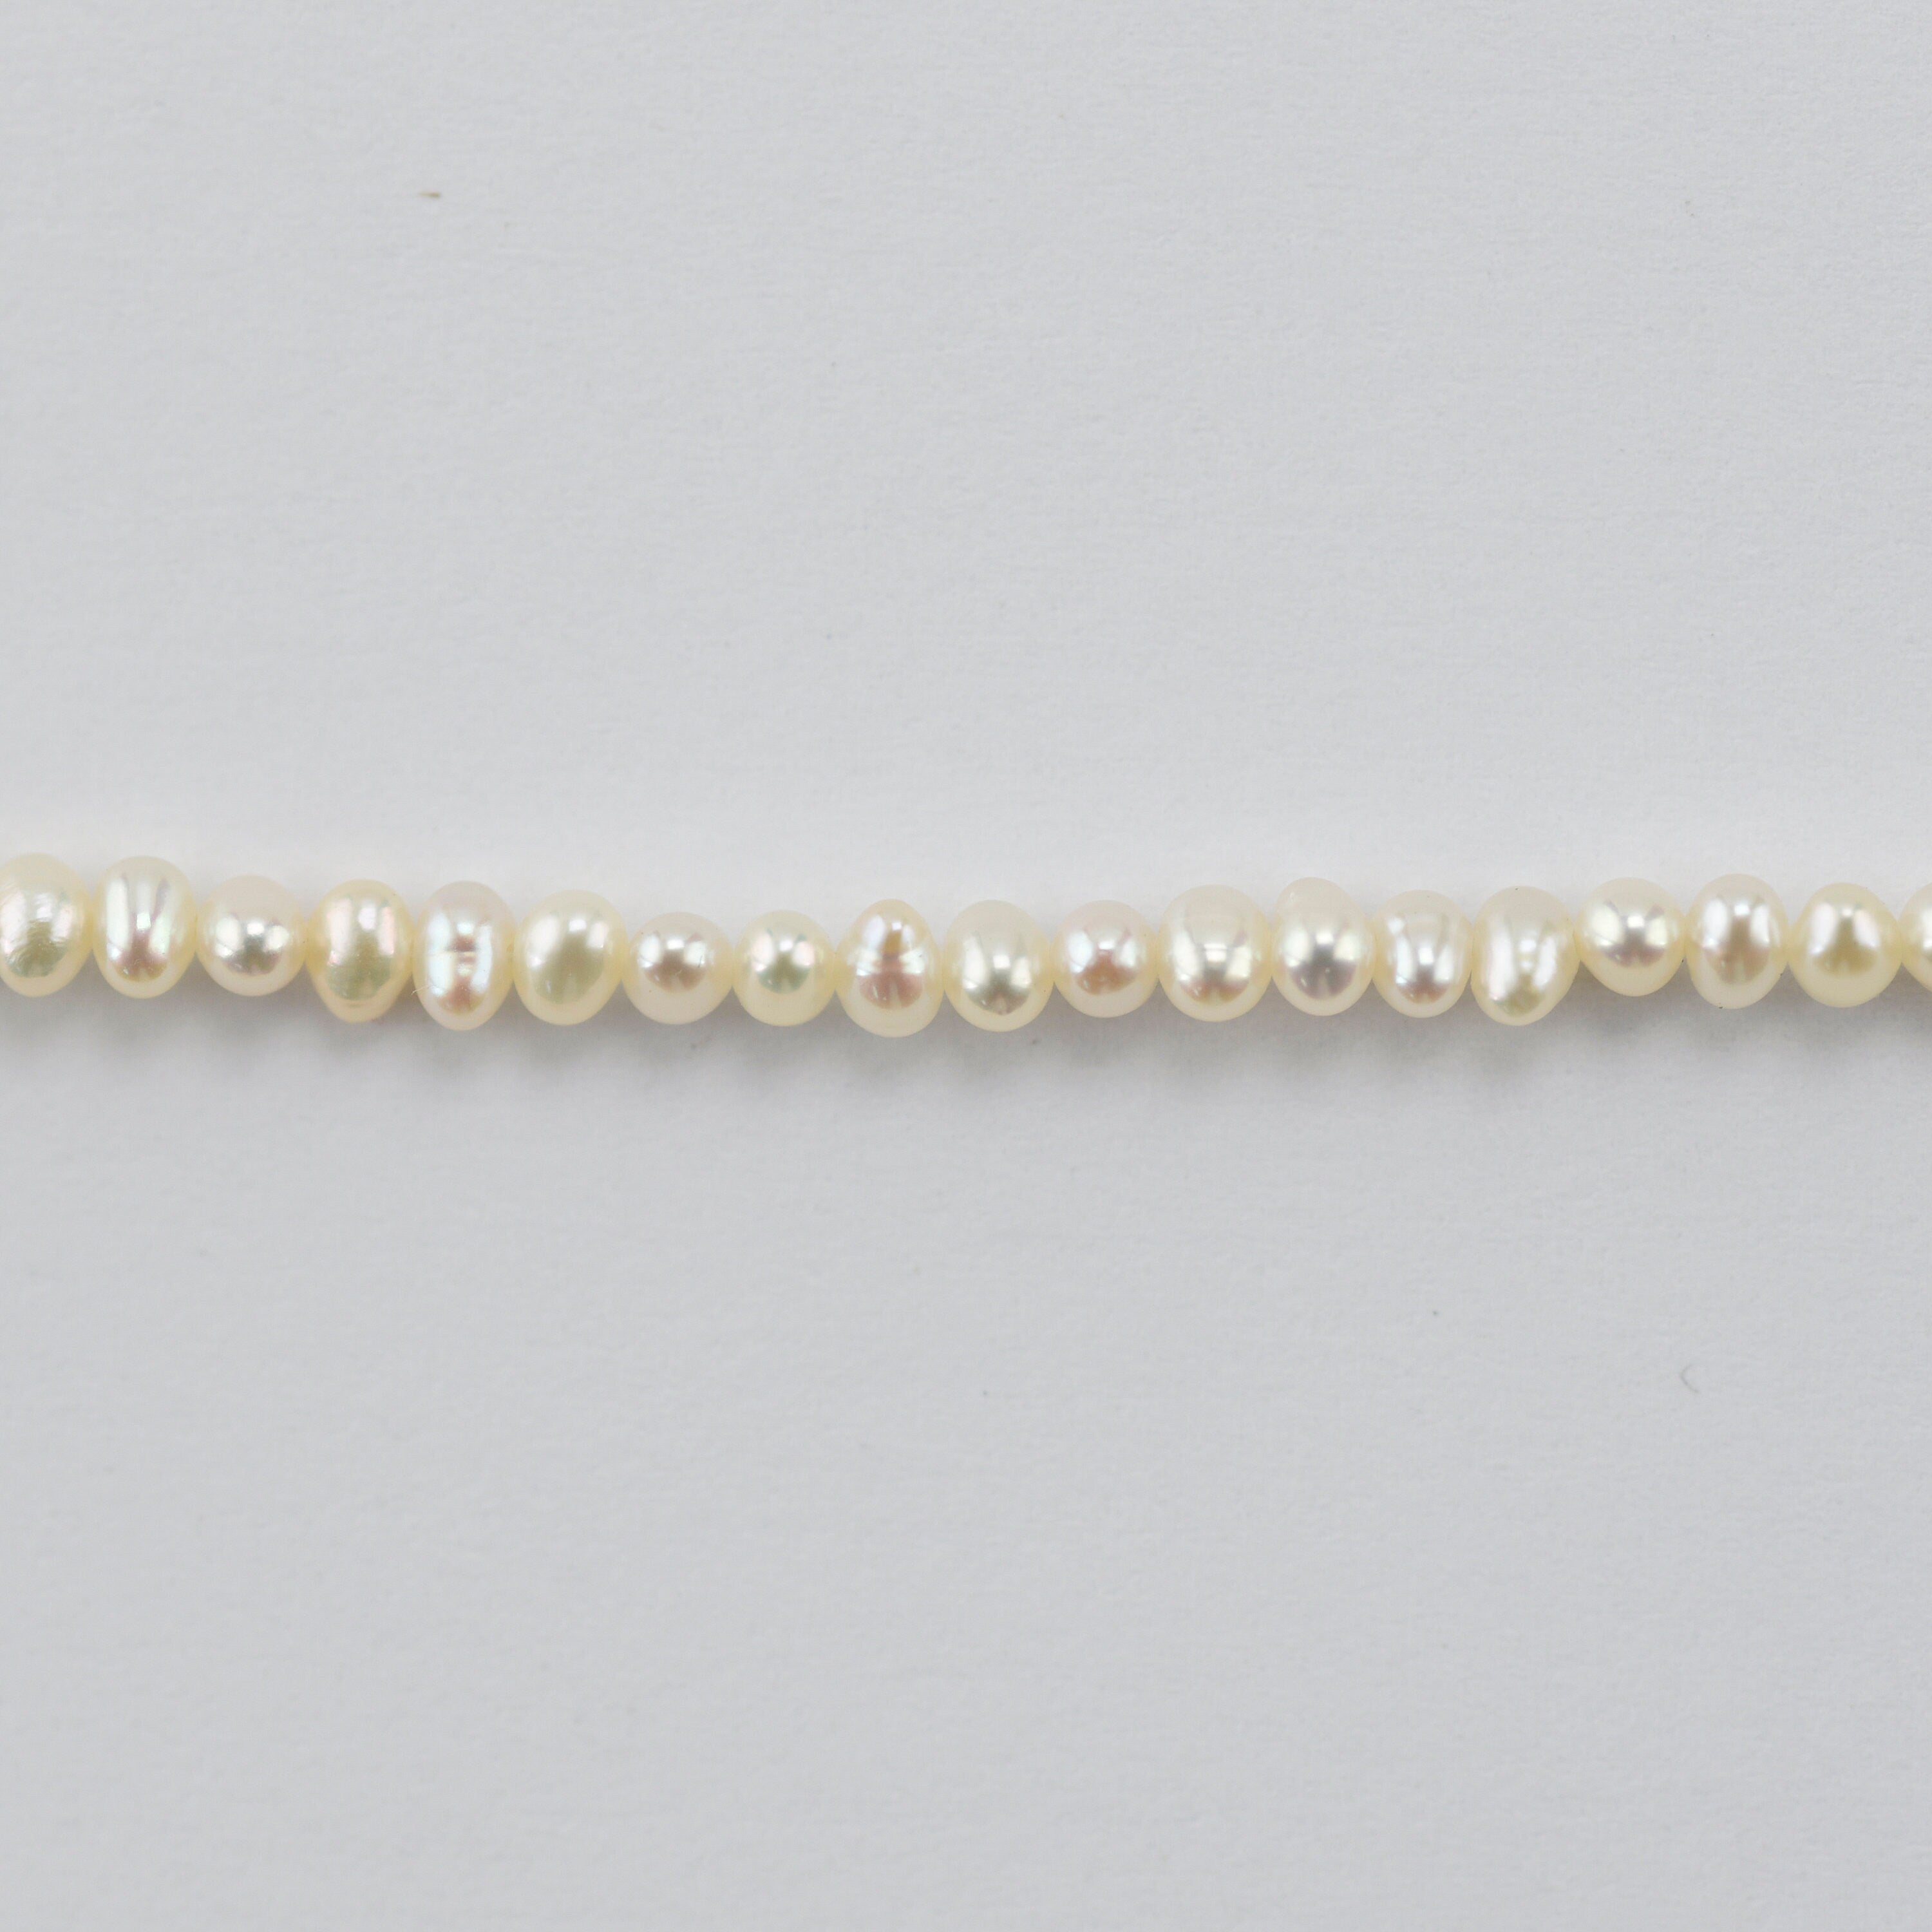 3MM Ivory/Cream Colored Potato Shaped Natural Freshwater Pearls P-31 –  Ayla's Originals